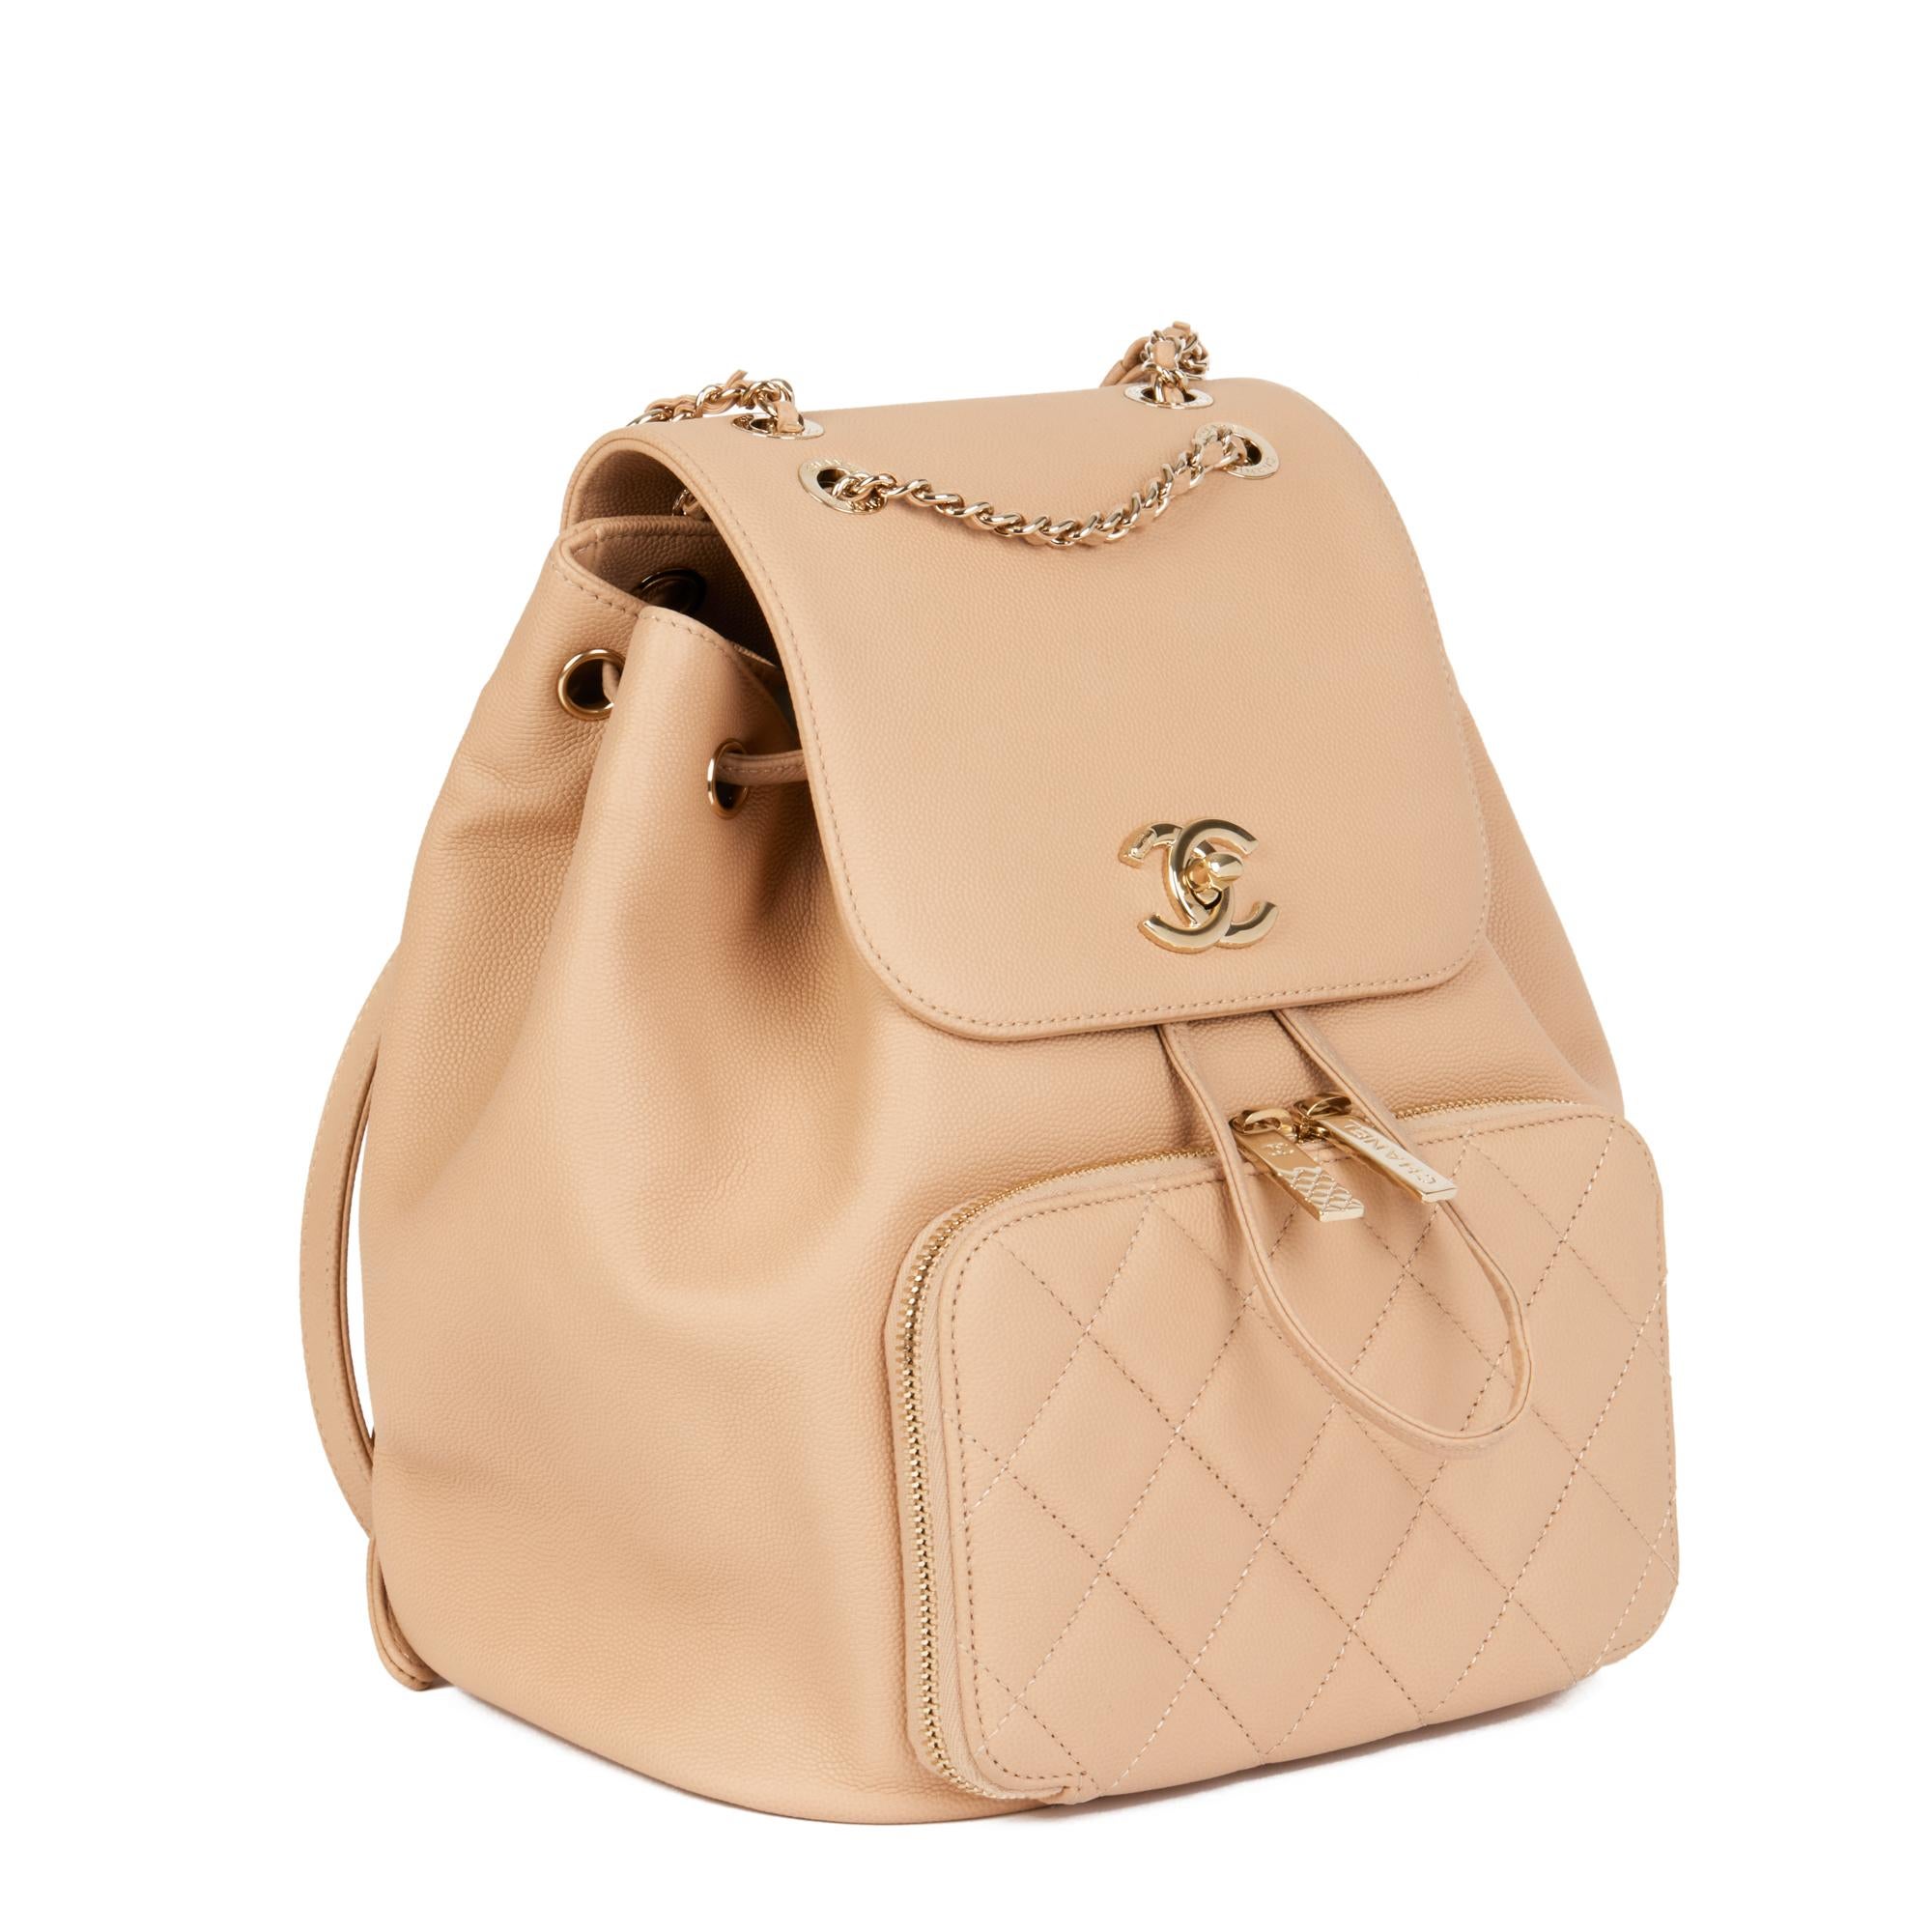 CHANEL
Beige Quilted Caviar Leather Business Affinity Backpack

Xupes Reference: HB4517
Serial Number: 29465284
Age (Circa): 2019
Accompanied By: Chanel Dust Bag, Authenticity Card, Care Booklet
Authenticity Details: Authenticity Card, Serial